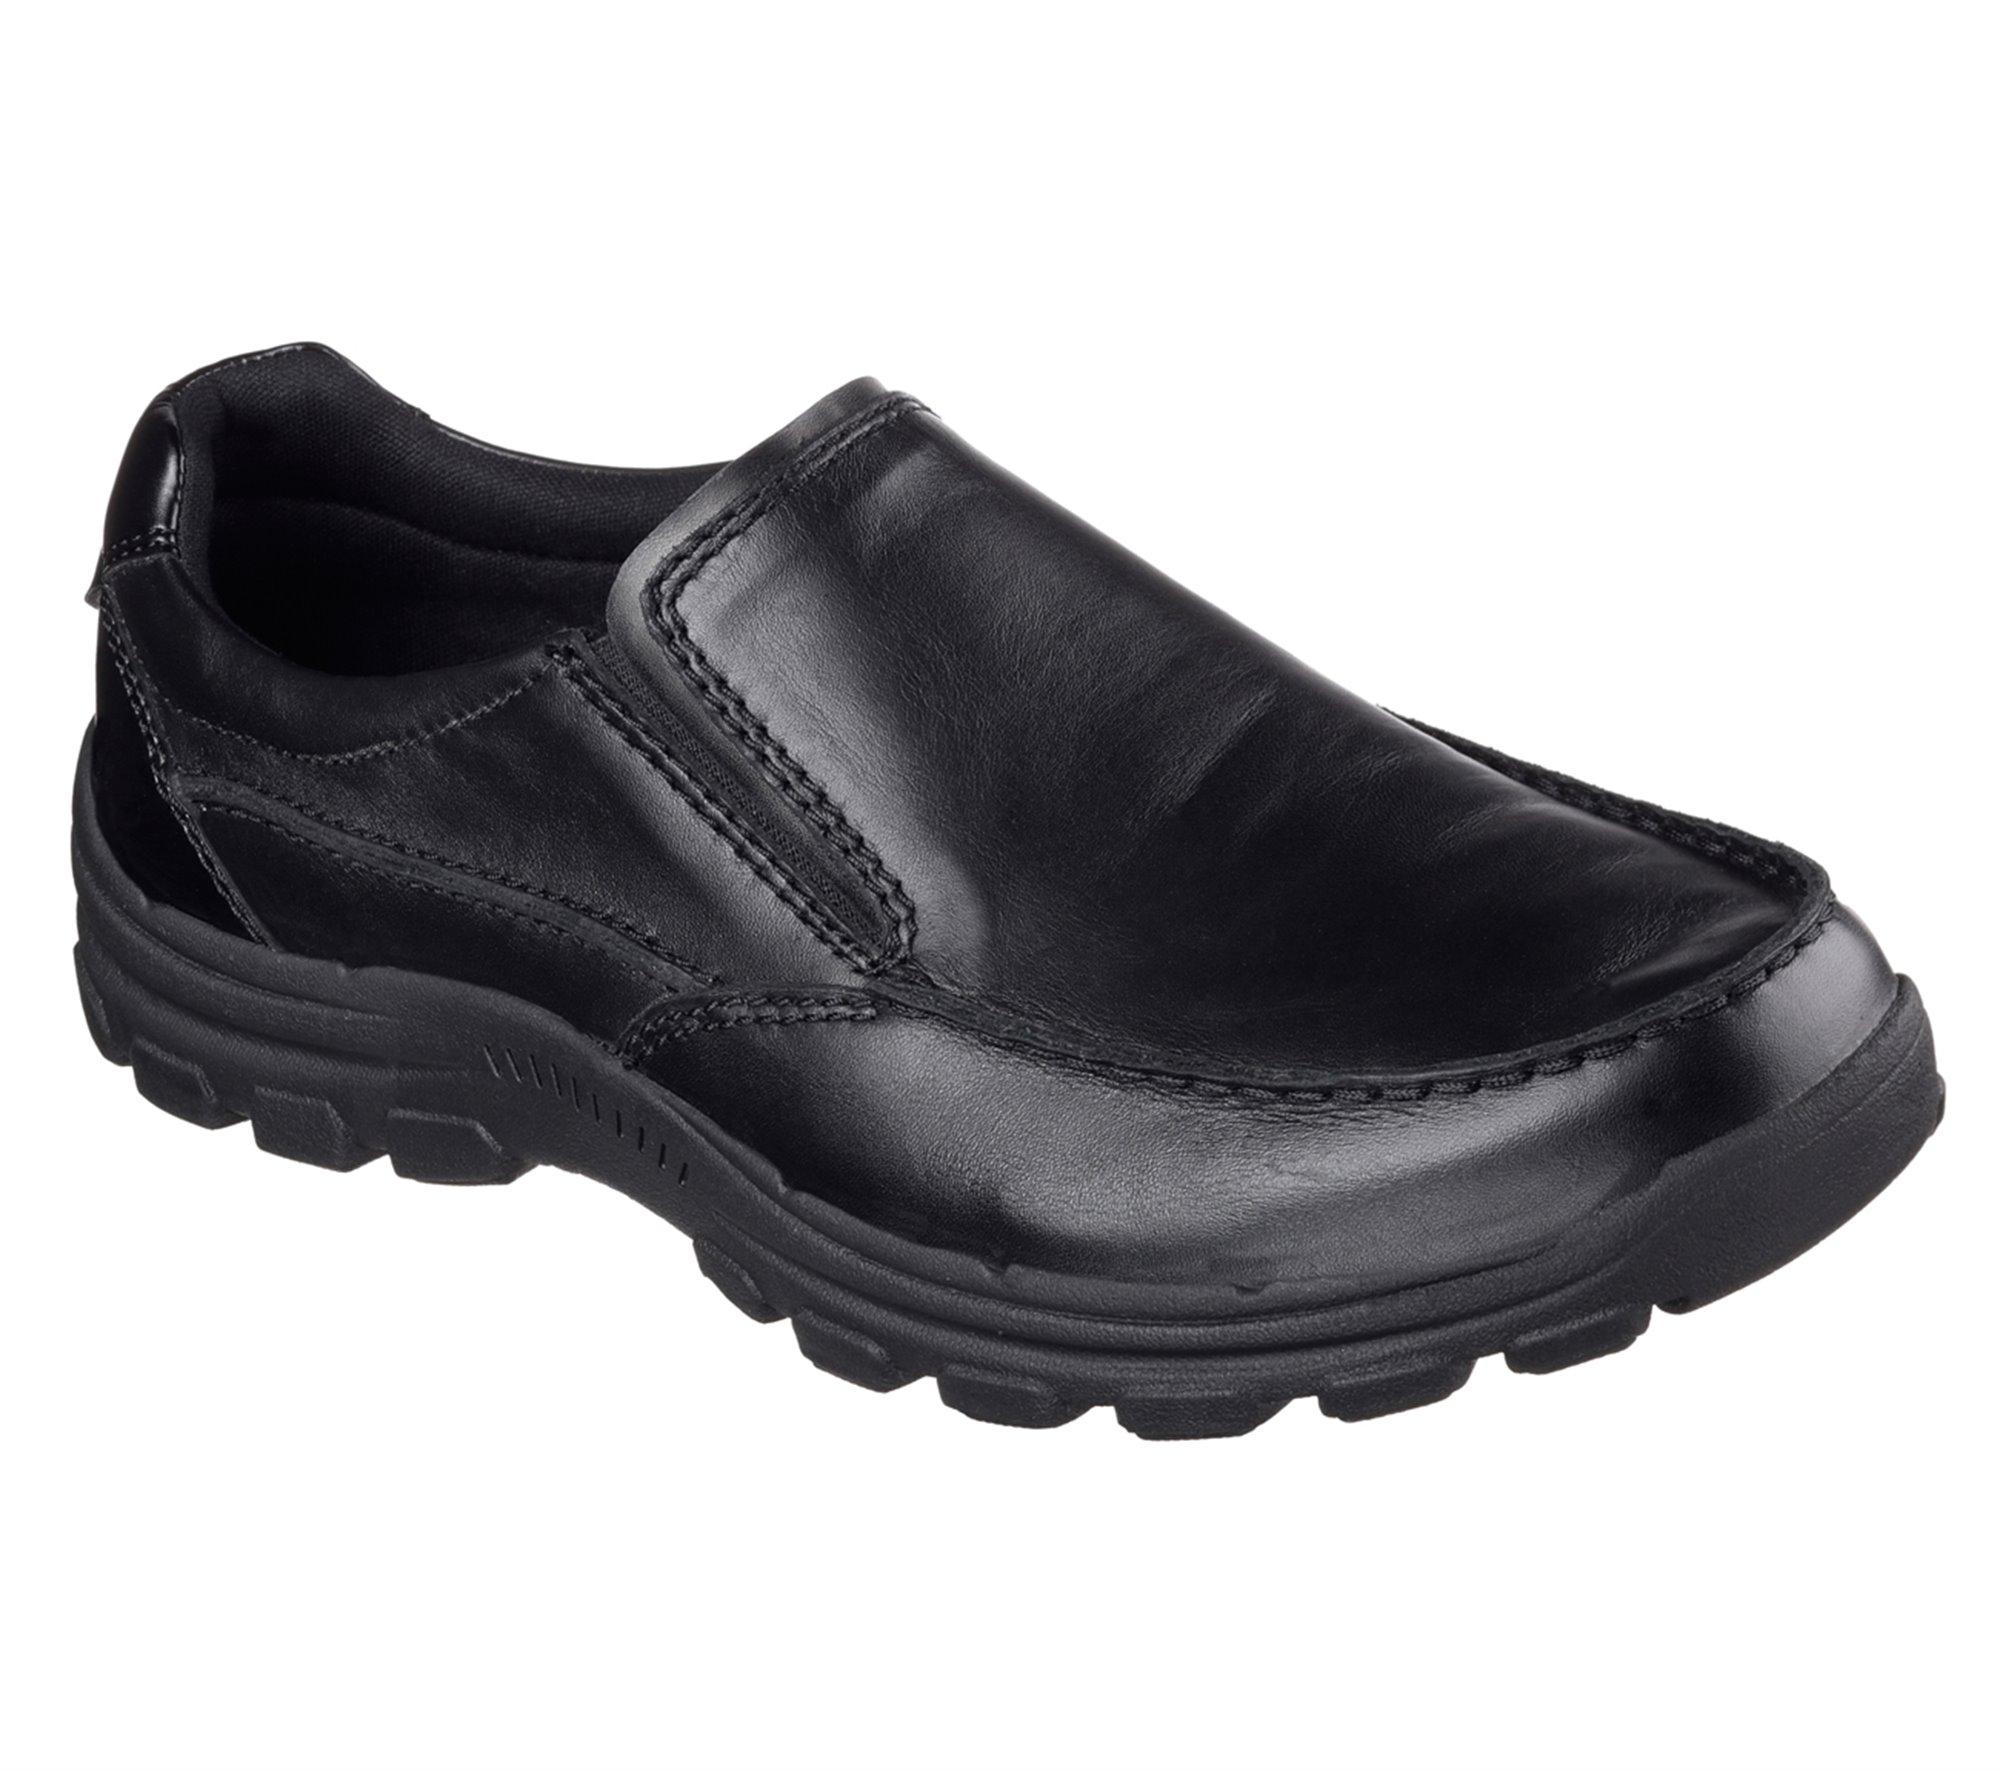 Skechers Suede Relaxed Fit: Braver - Rayland in Black Patent (Black ...